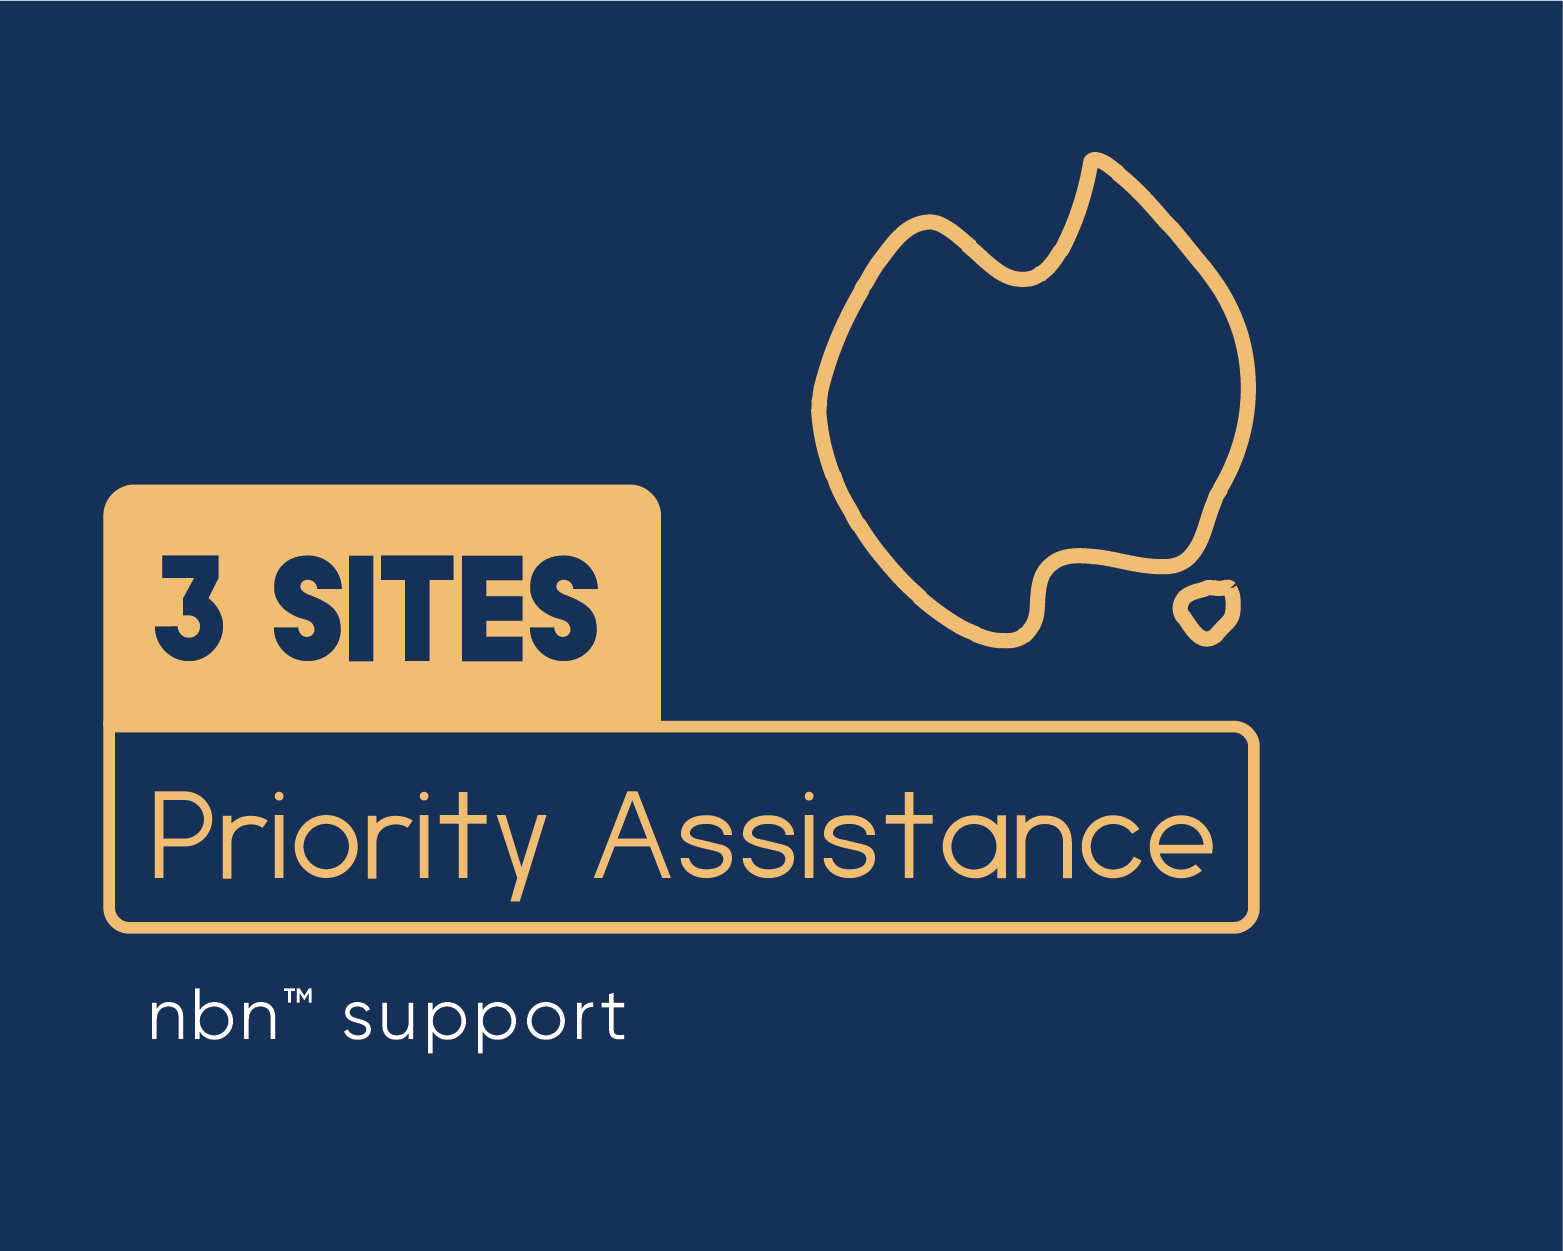 3 sites priority assistance